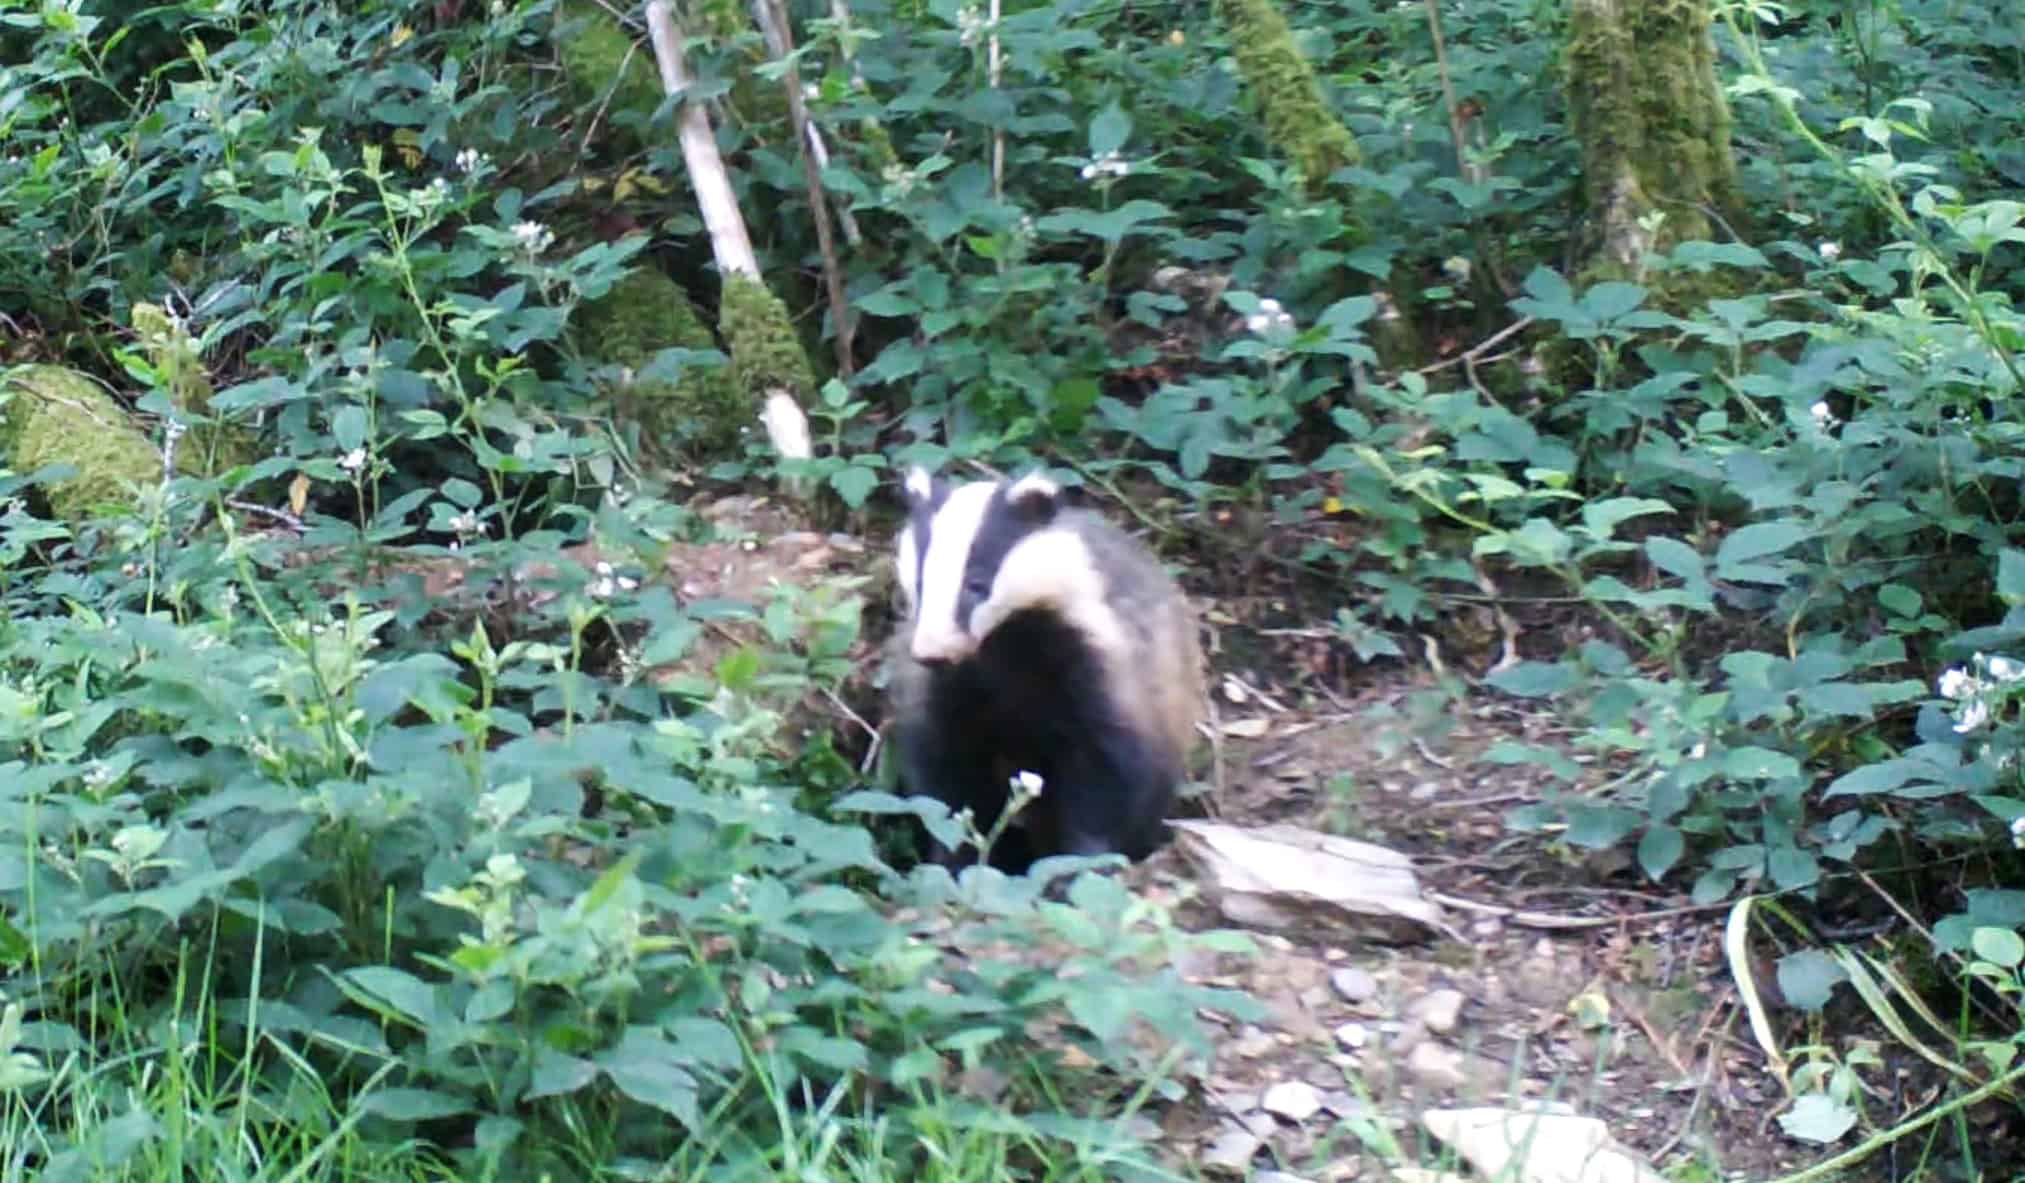 Why do Eurasian badgers live with foxes? Candid Animal Cam spots badgers